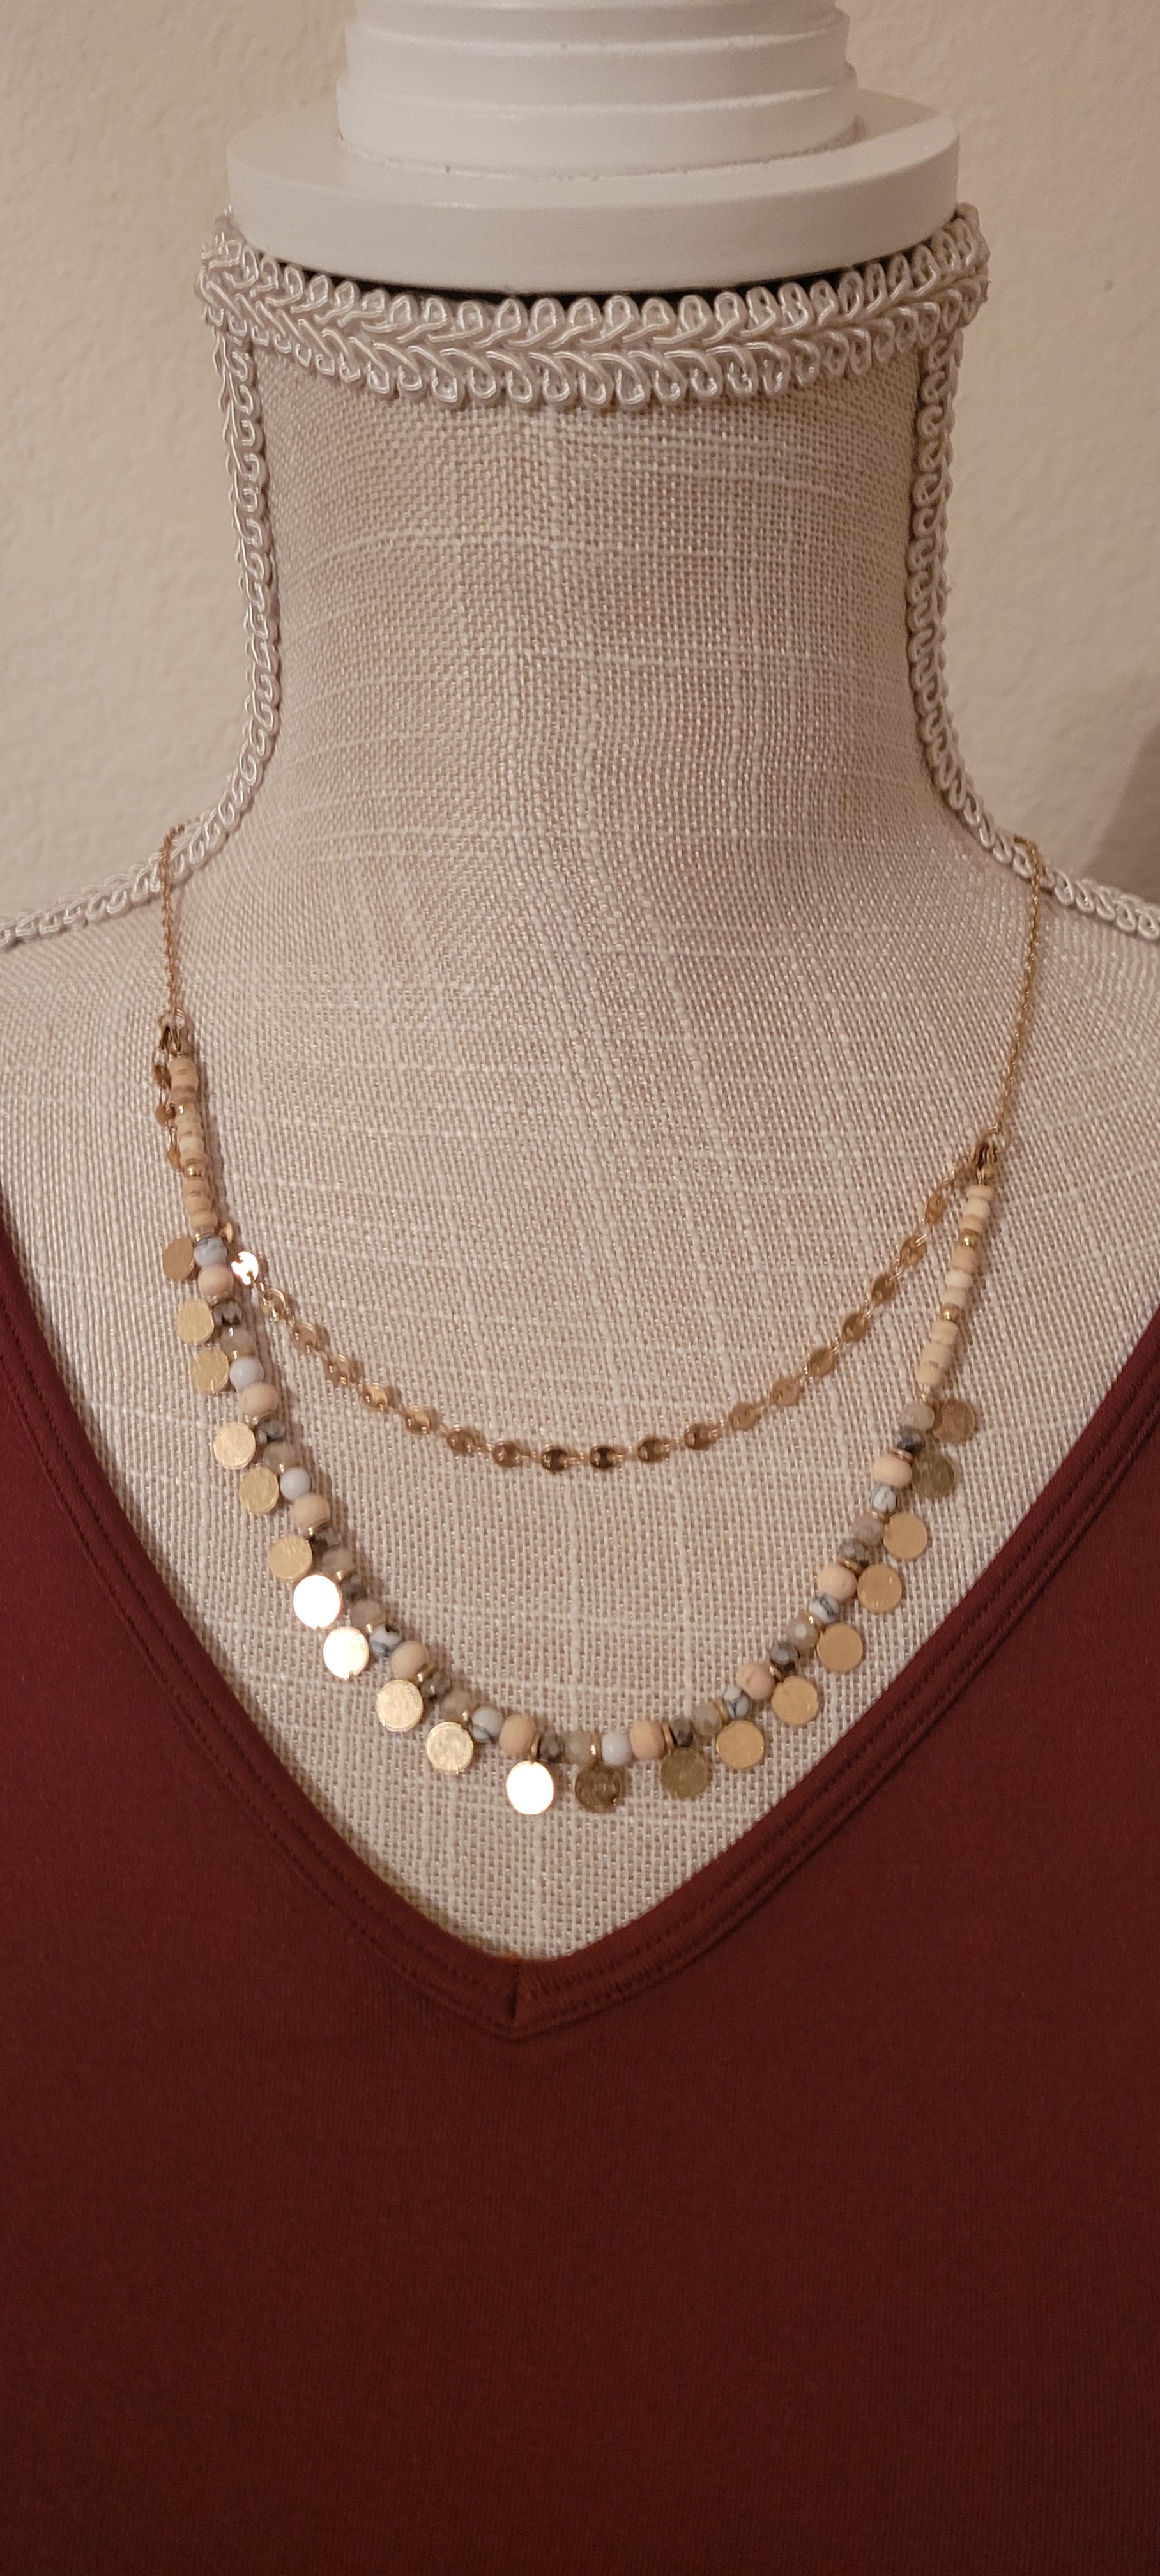 Adjustable chain Color: Gold link chains with natural stone beads Limited supply!  